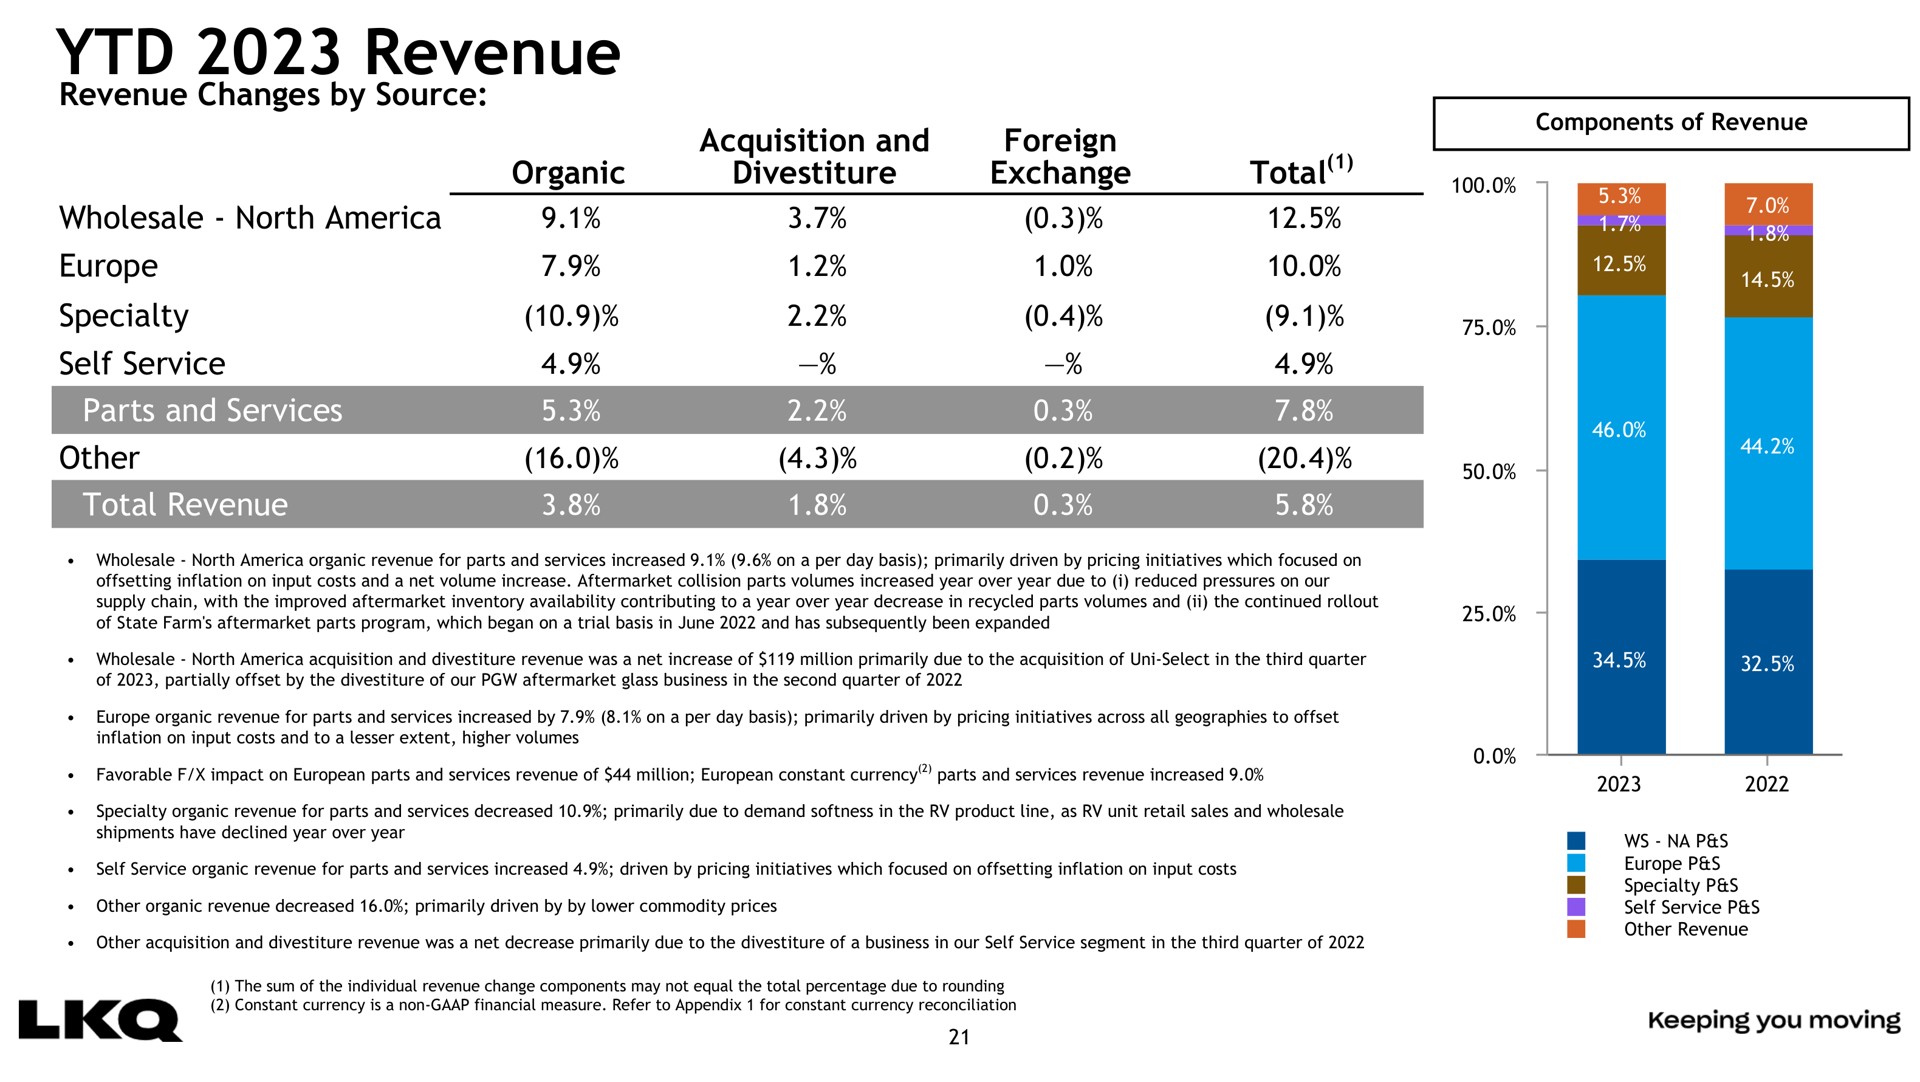 revenue specialty organic acquisition and divestiture foreign exchange total | LKQ